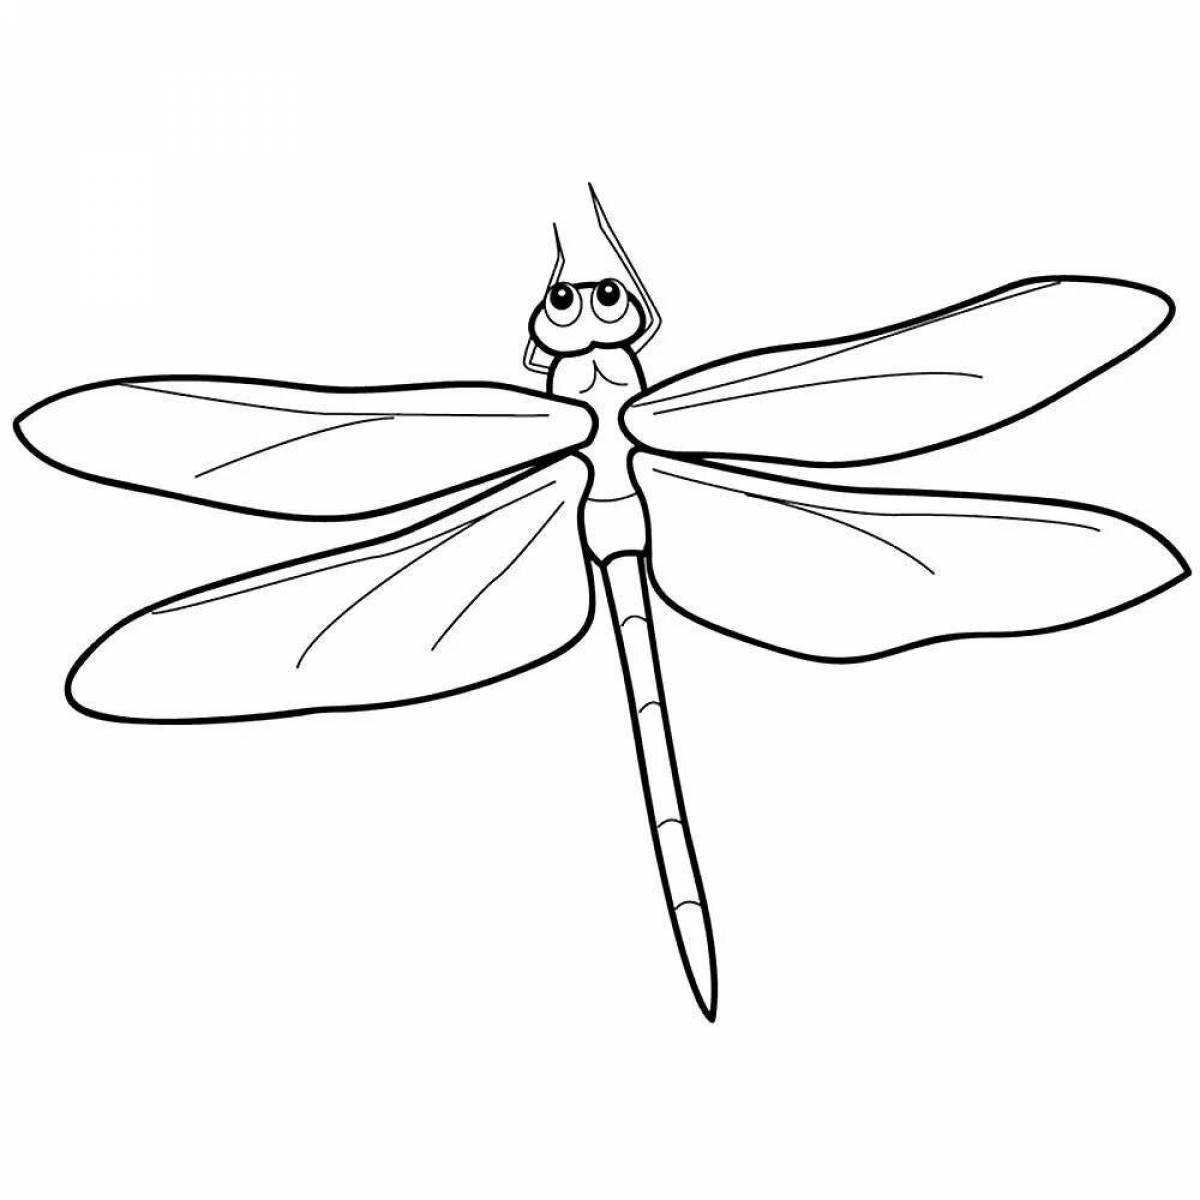 Inspirational dragonfly coloring book for kids